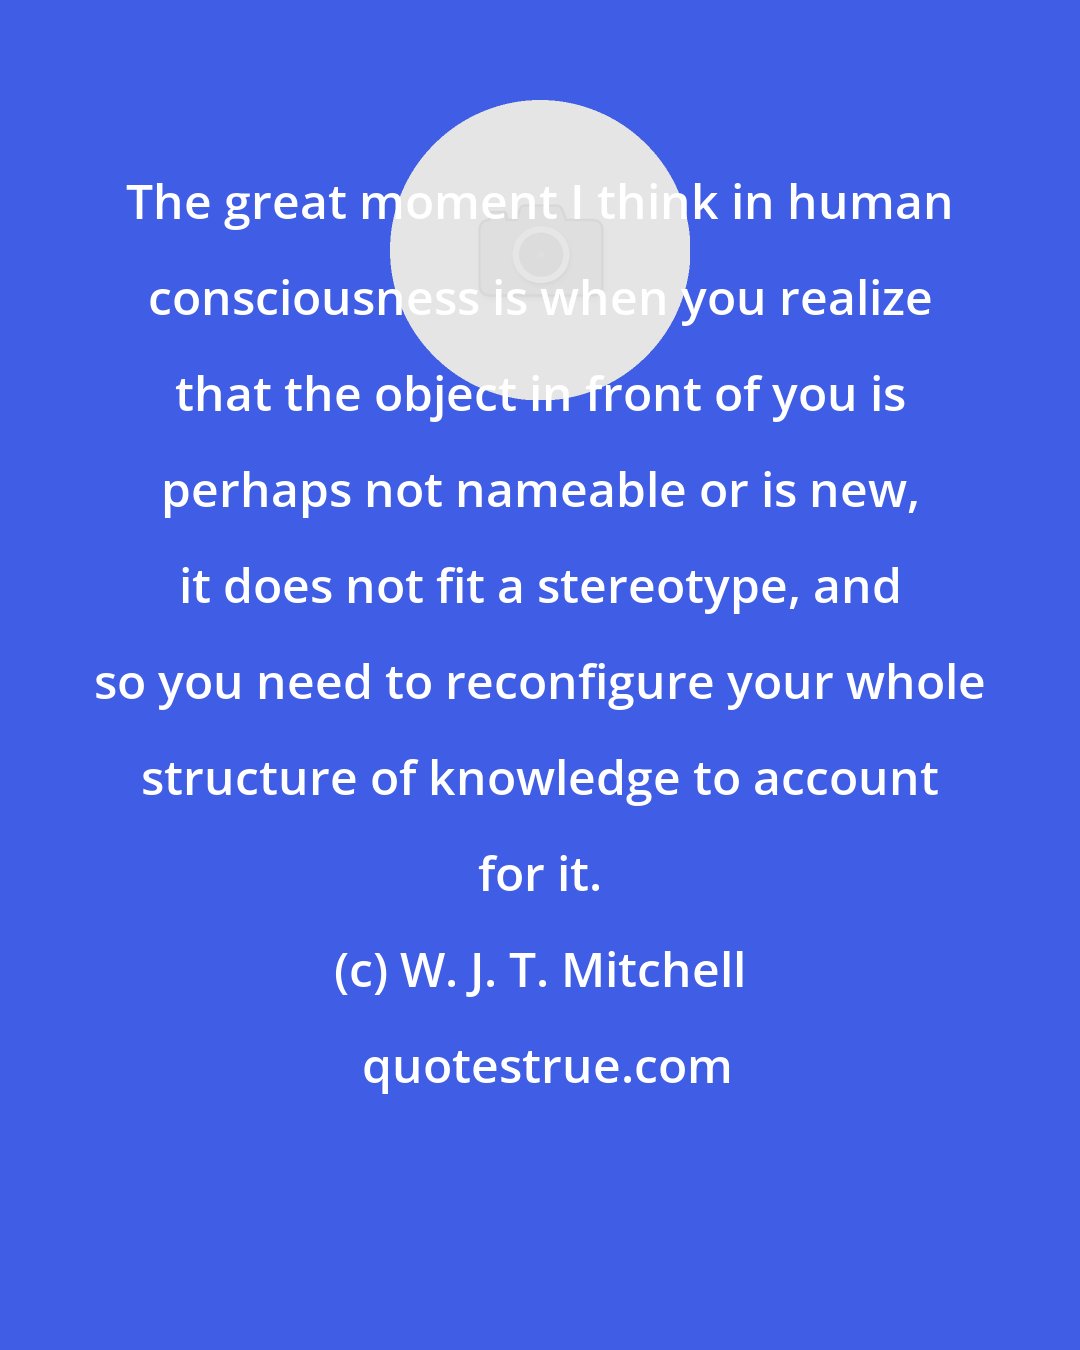 W. J. T. Mitchell: The great moment I think in human consciousness is when you realize that the object in front of you is perhaps not nameable or is new, it does not fit a stereotype, and so you need to reconfigure your whole structure of knowledge to account for it.